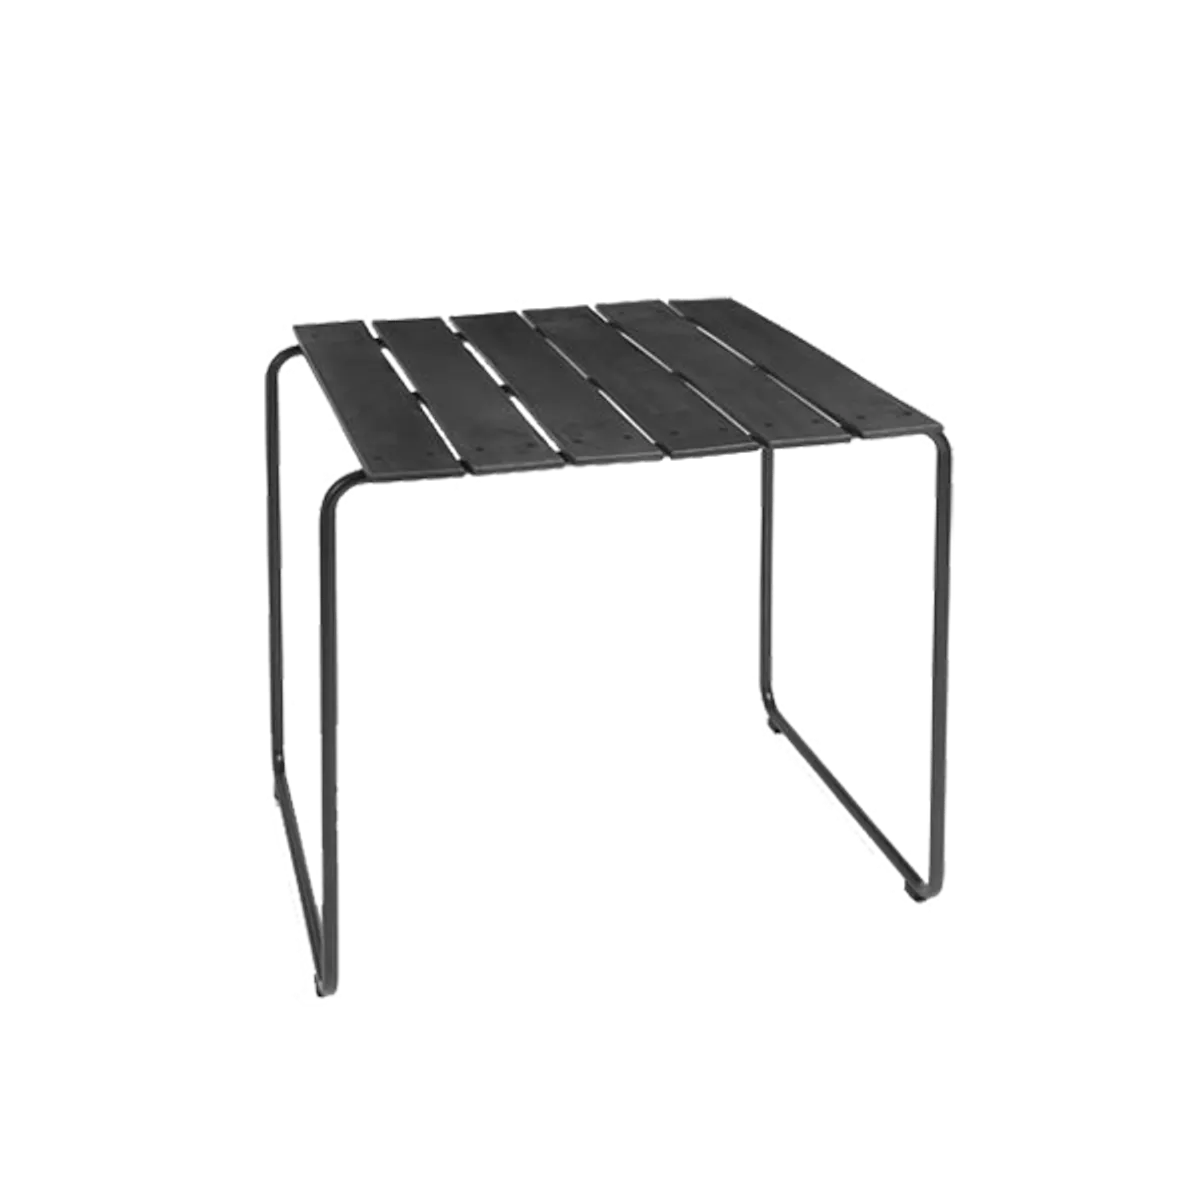 Web Ocean Table Recycled Plastic Waste With Metal Sled Legs Outdoor Dining Table In Black Inside Out Contracts